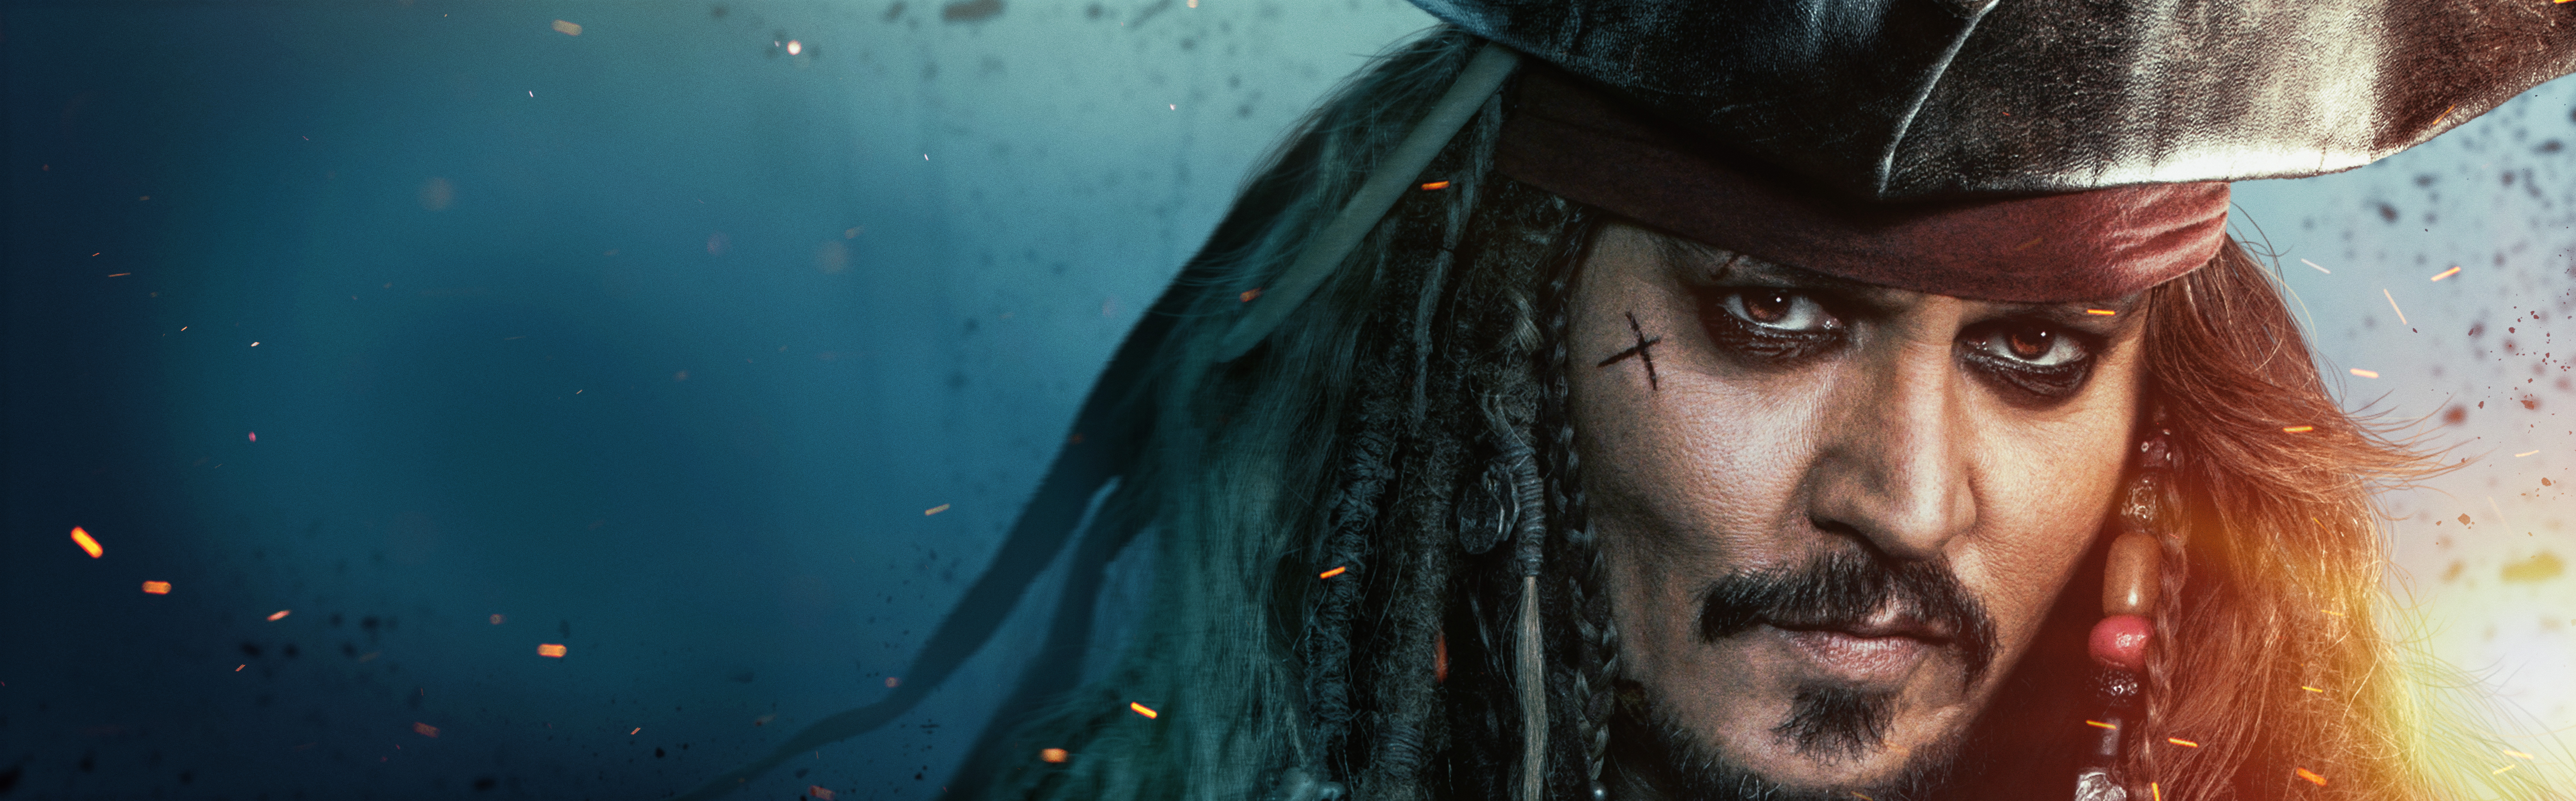 Wallpapers film adventure Pirates of the Caribbean: Dead men tell no tales on the desktop